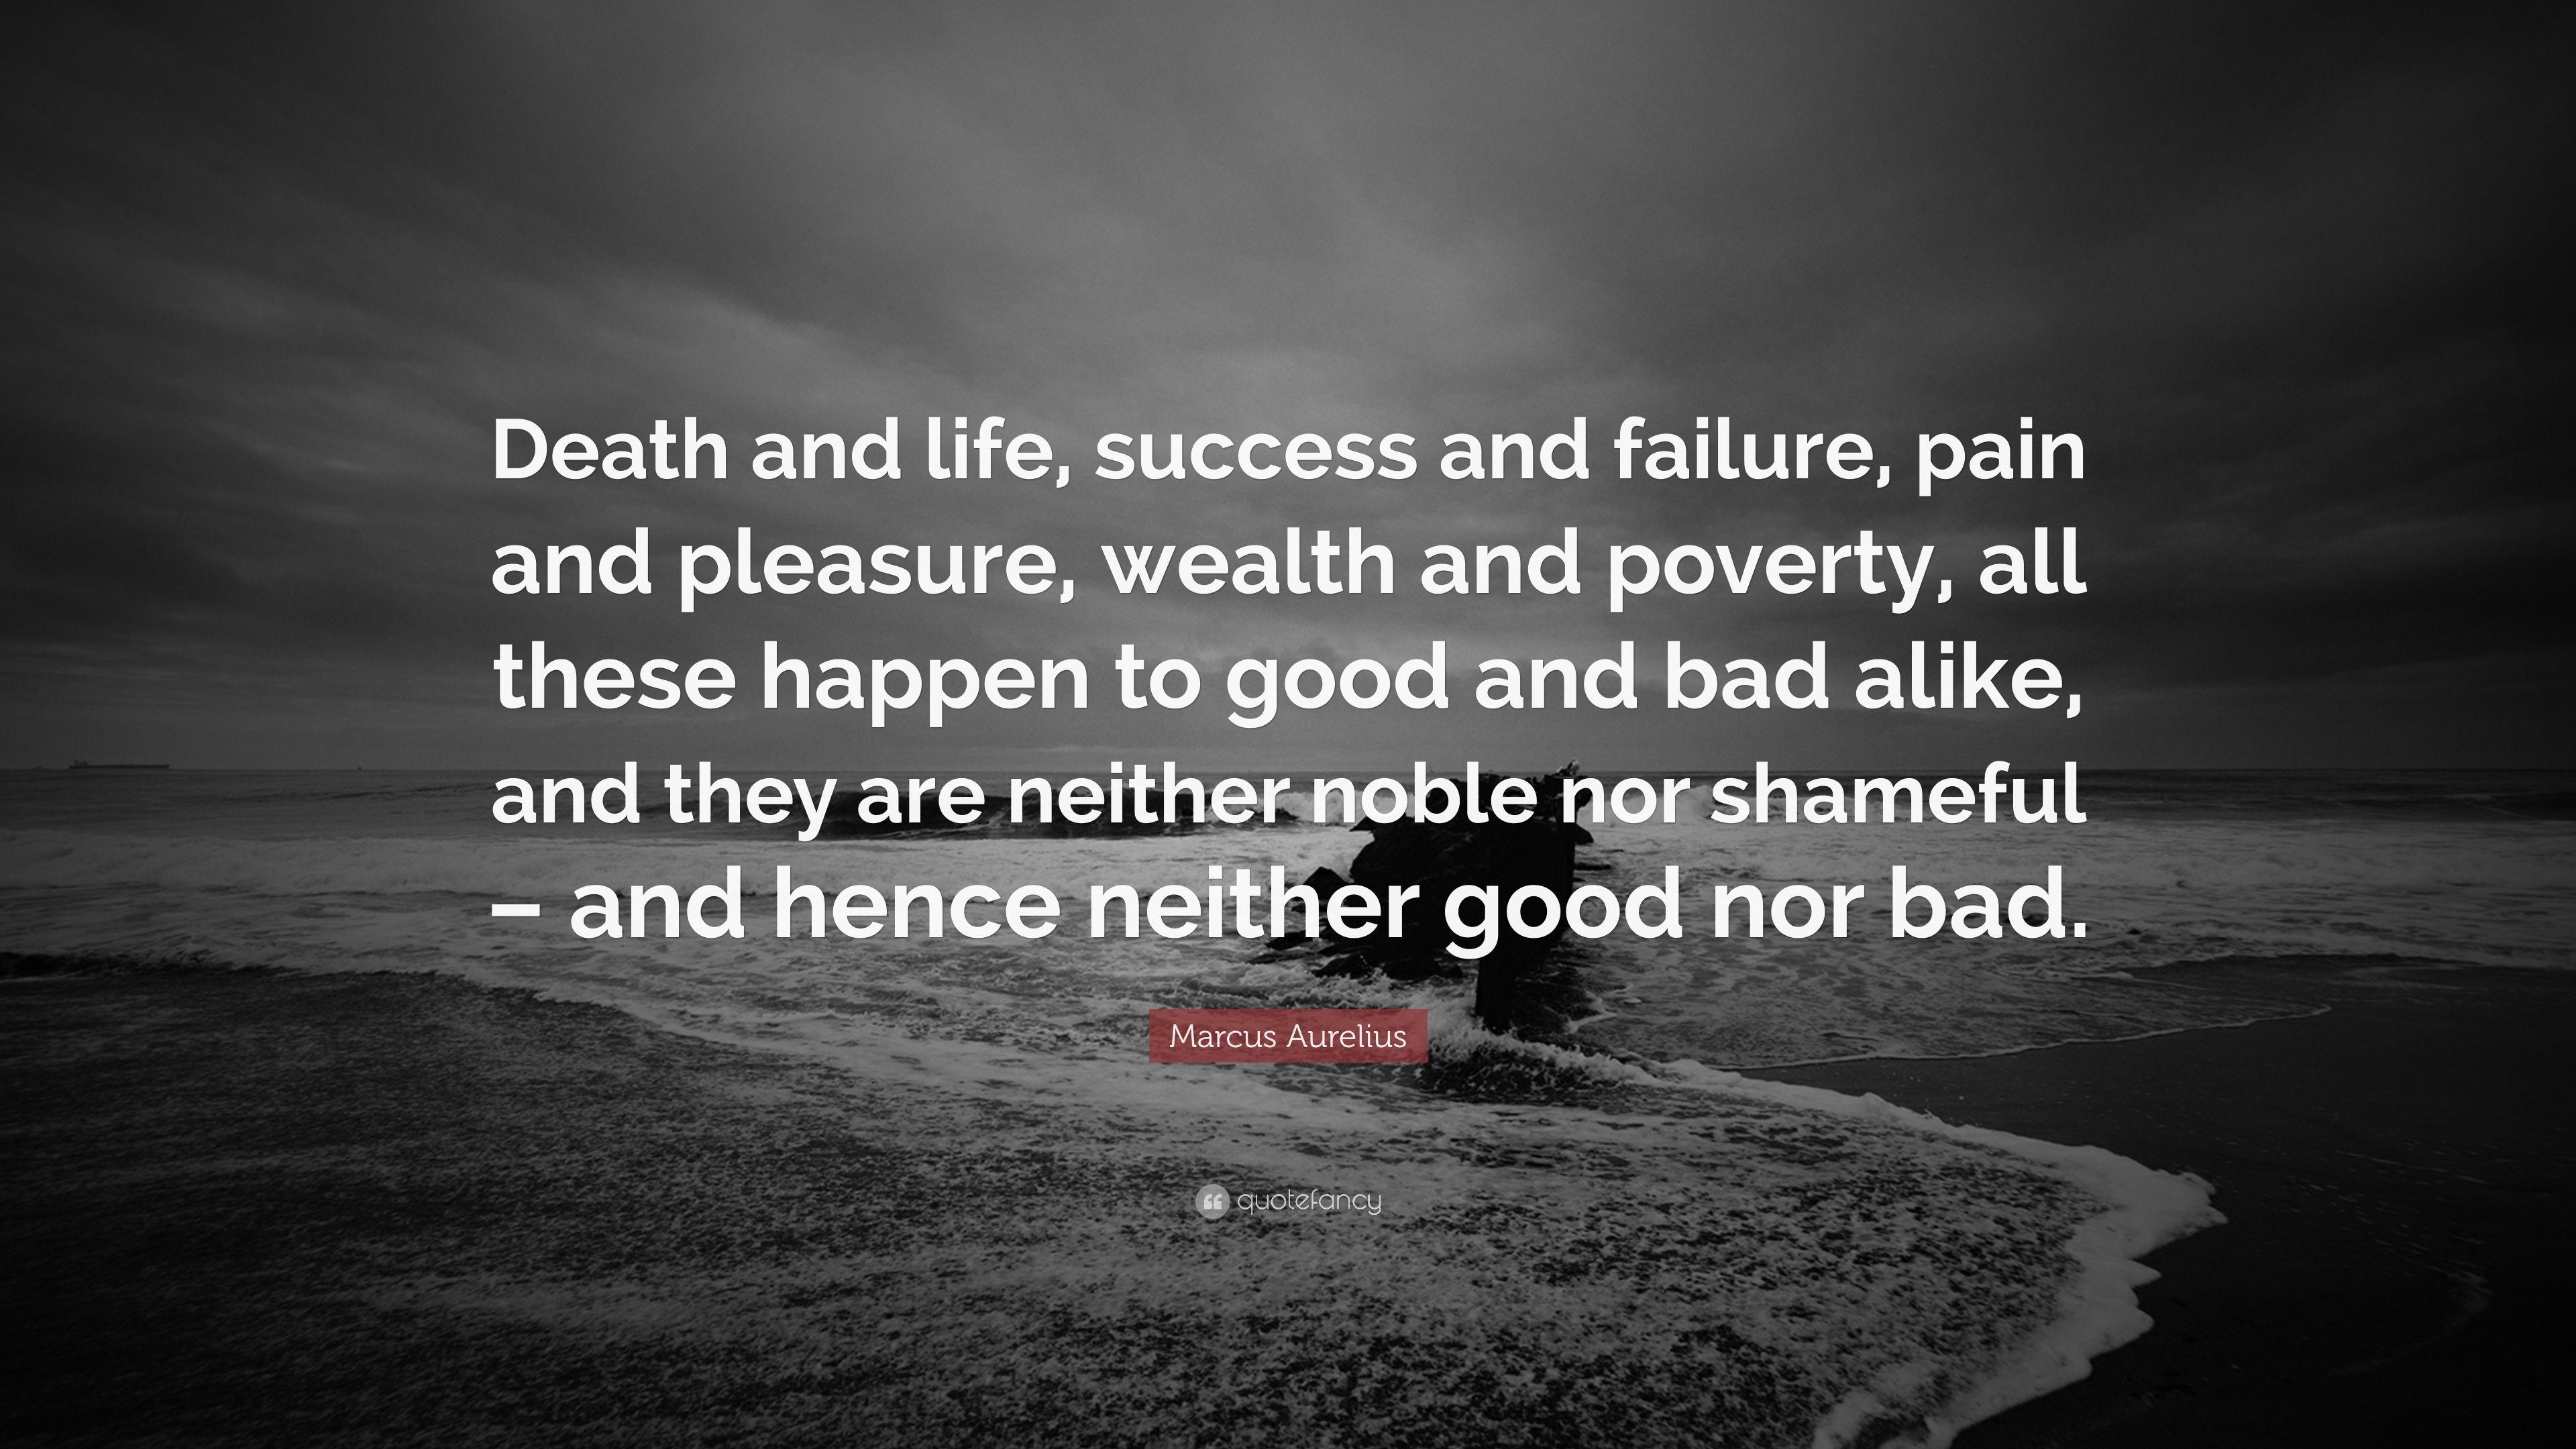 Marcus Aurelius Quote: “Death and life, success and failure, pain and pleasure, wealth and poverty, all these happen to good and bad alike, and .” (12 wallpaper)